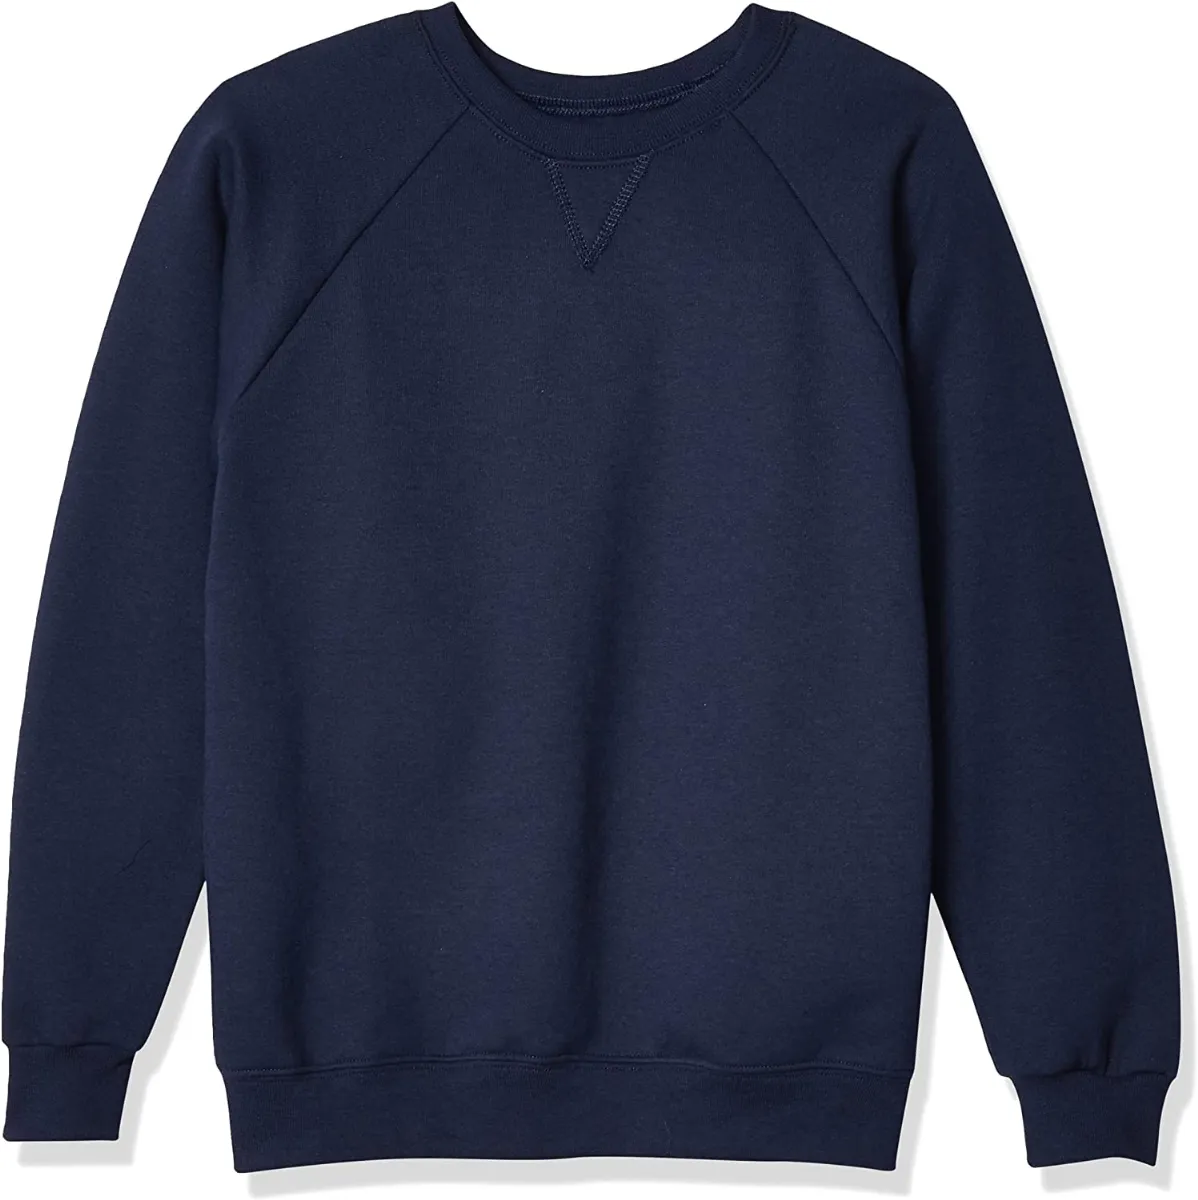 24 Pieces of Youth Crew Neck Sweatshirt Solid Navy - Size X-Small